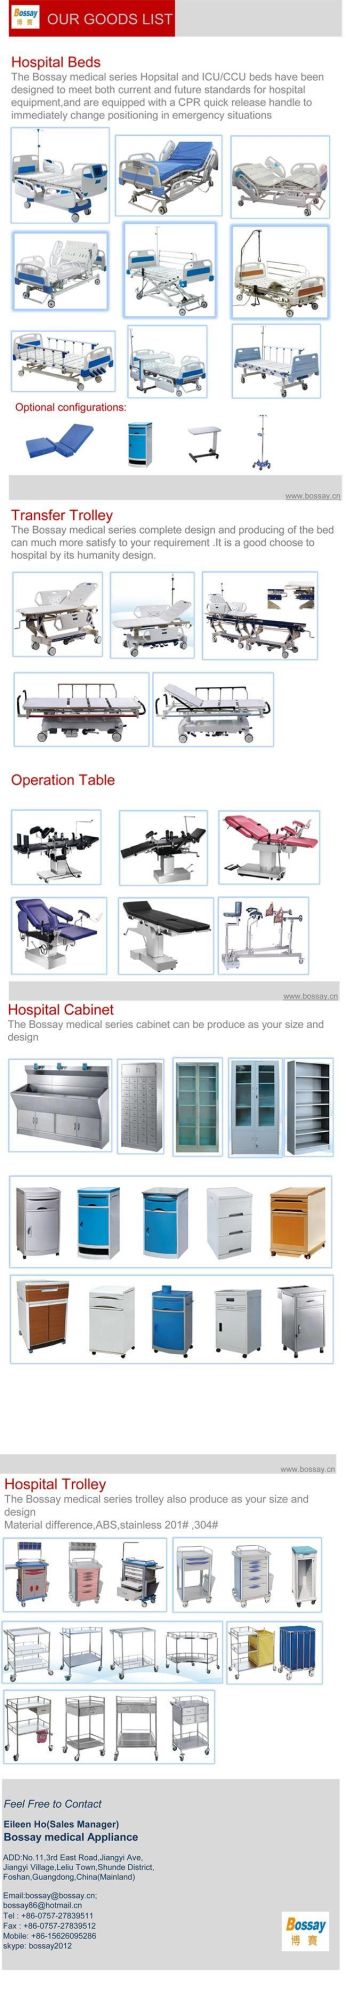 One Crank Manual Hospital Bed (BS-816)